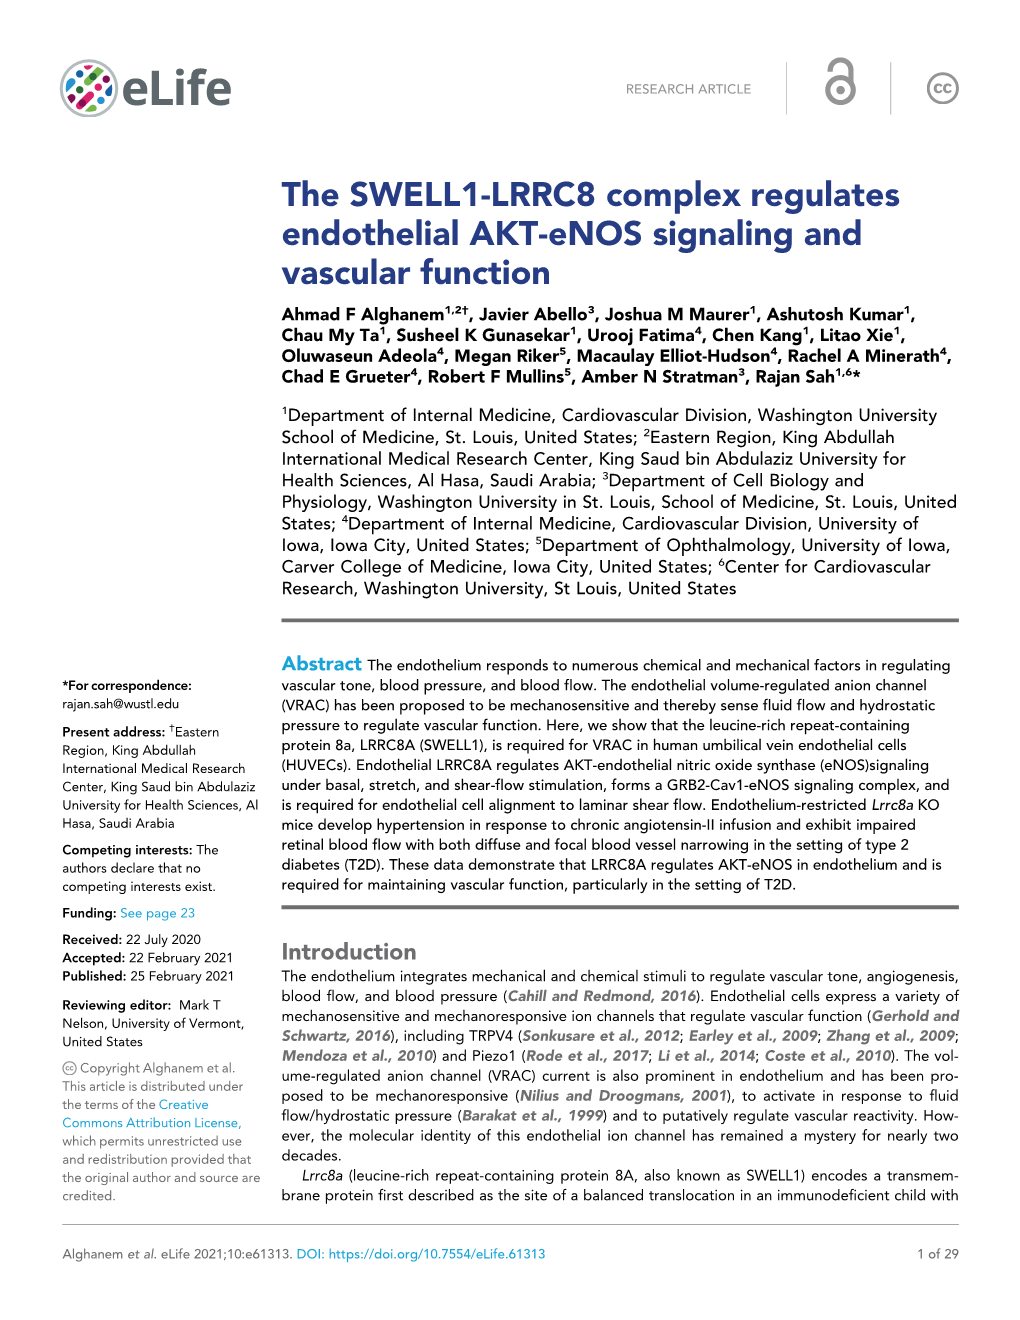 The SWELL1-LRRC8 Complex Regulates Endothelial AKT-Enos